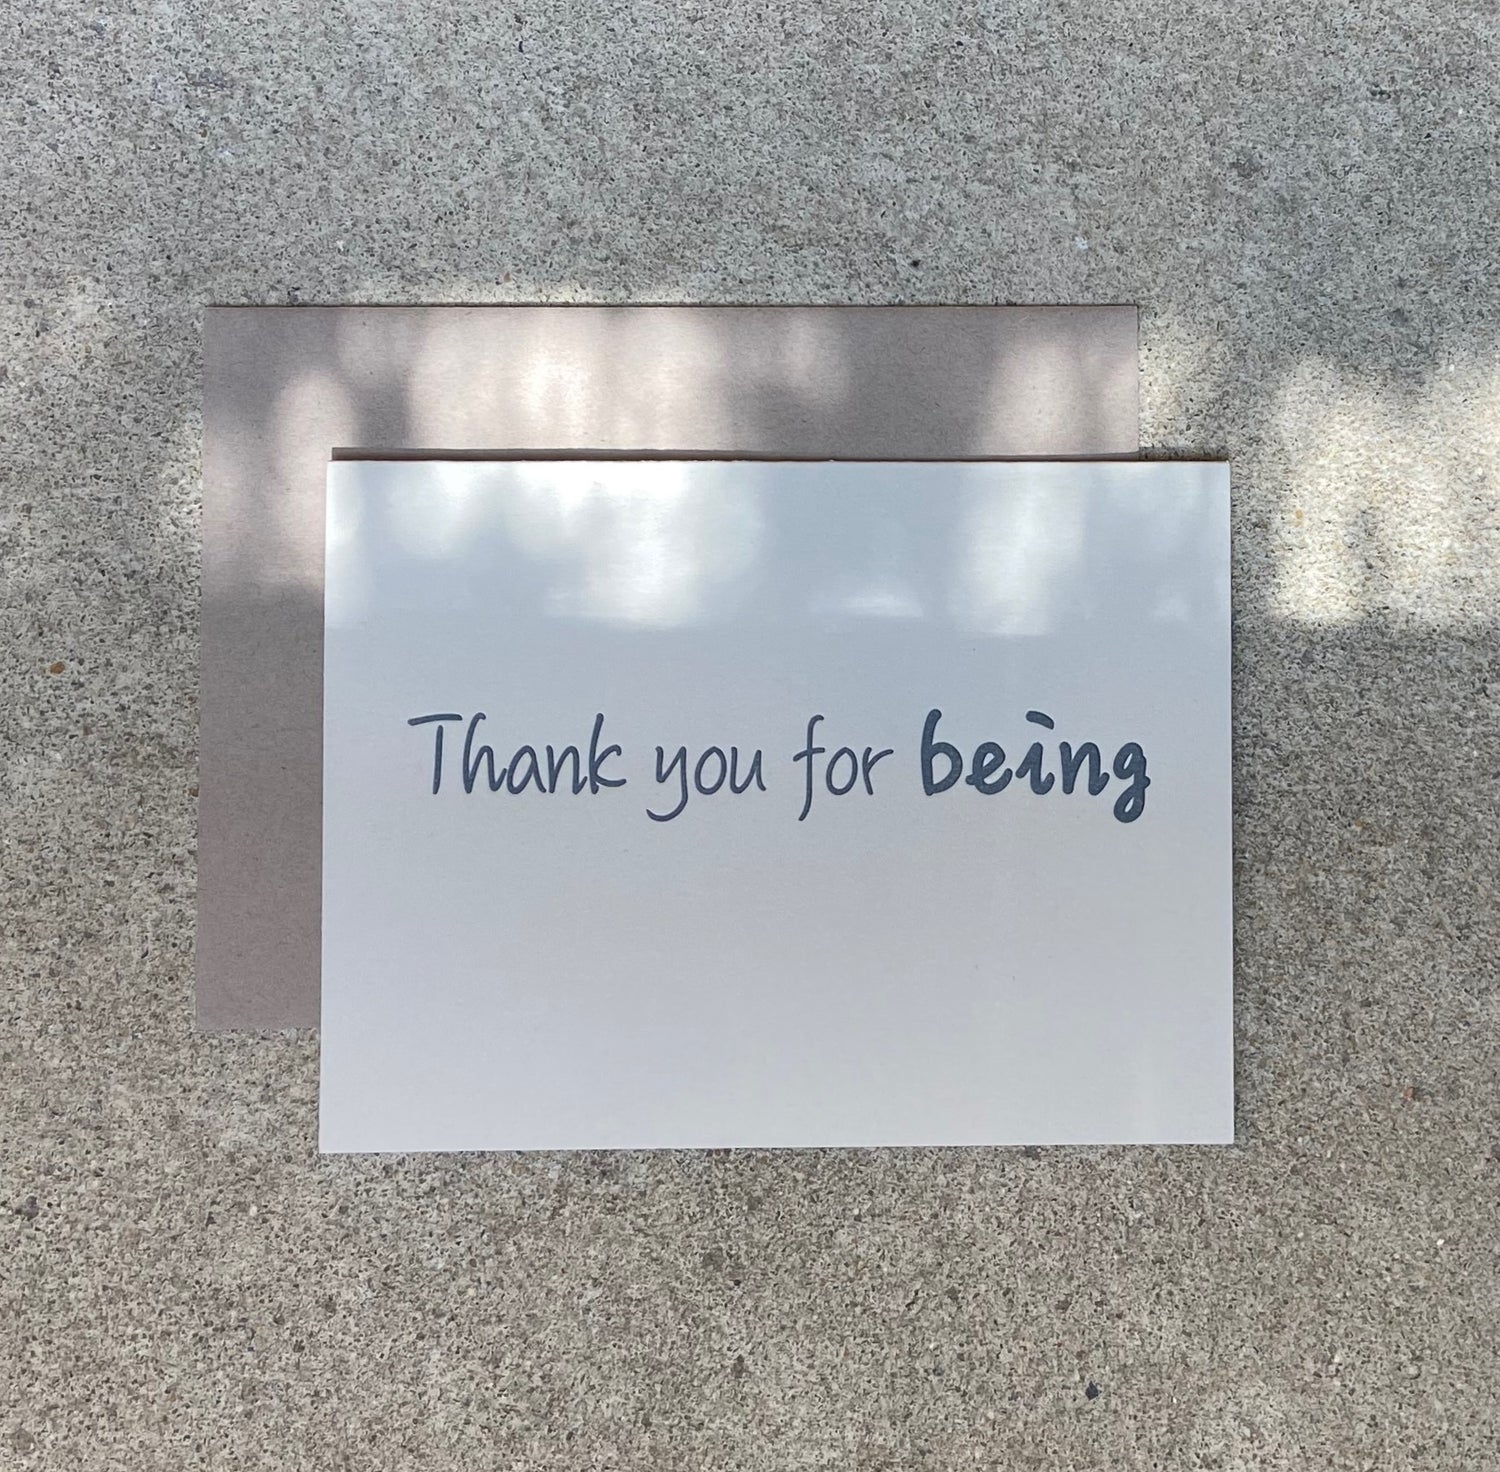 Thank You for Being greeting card